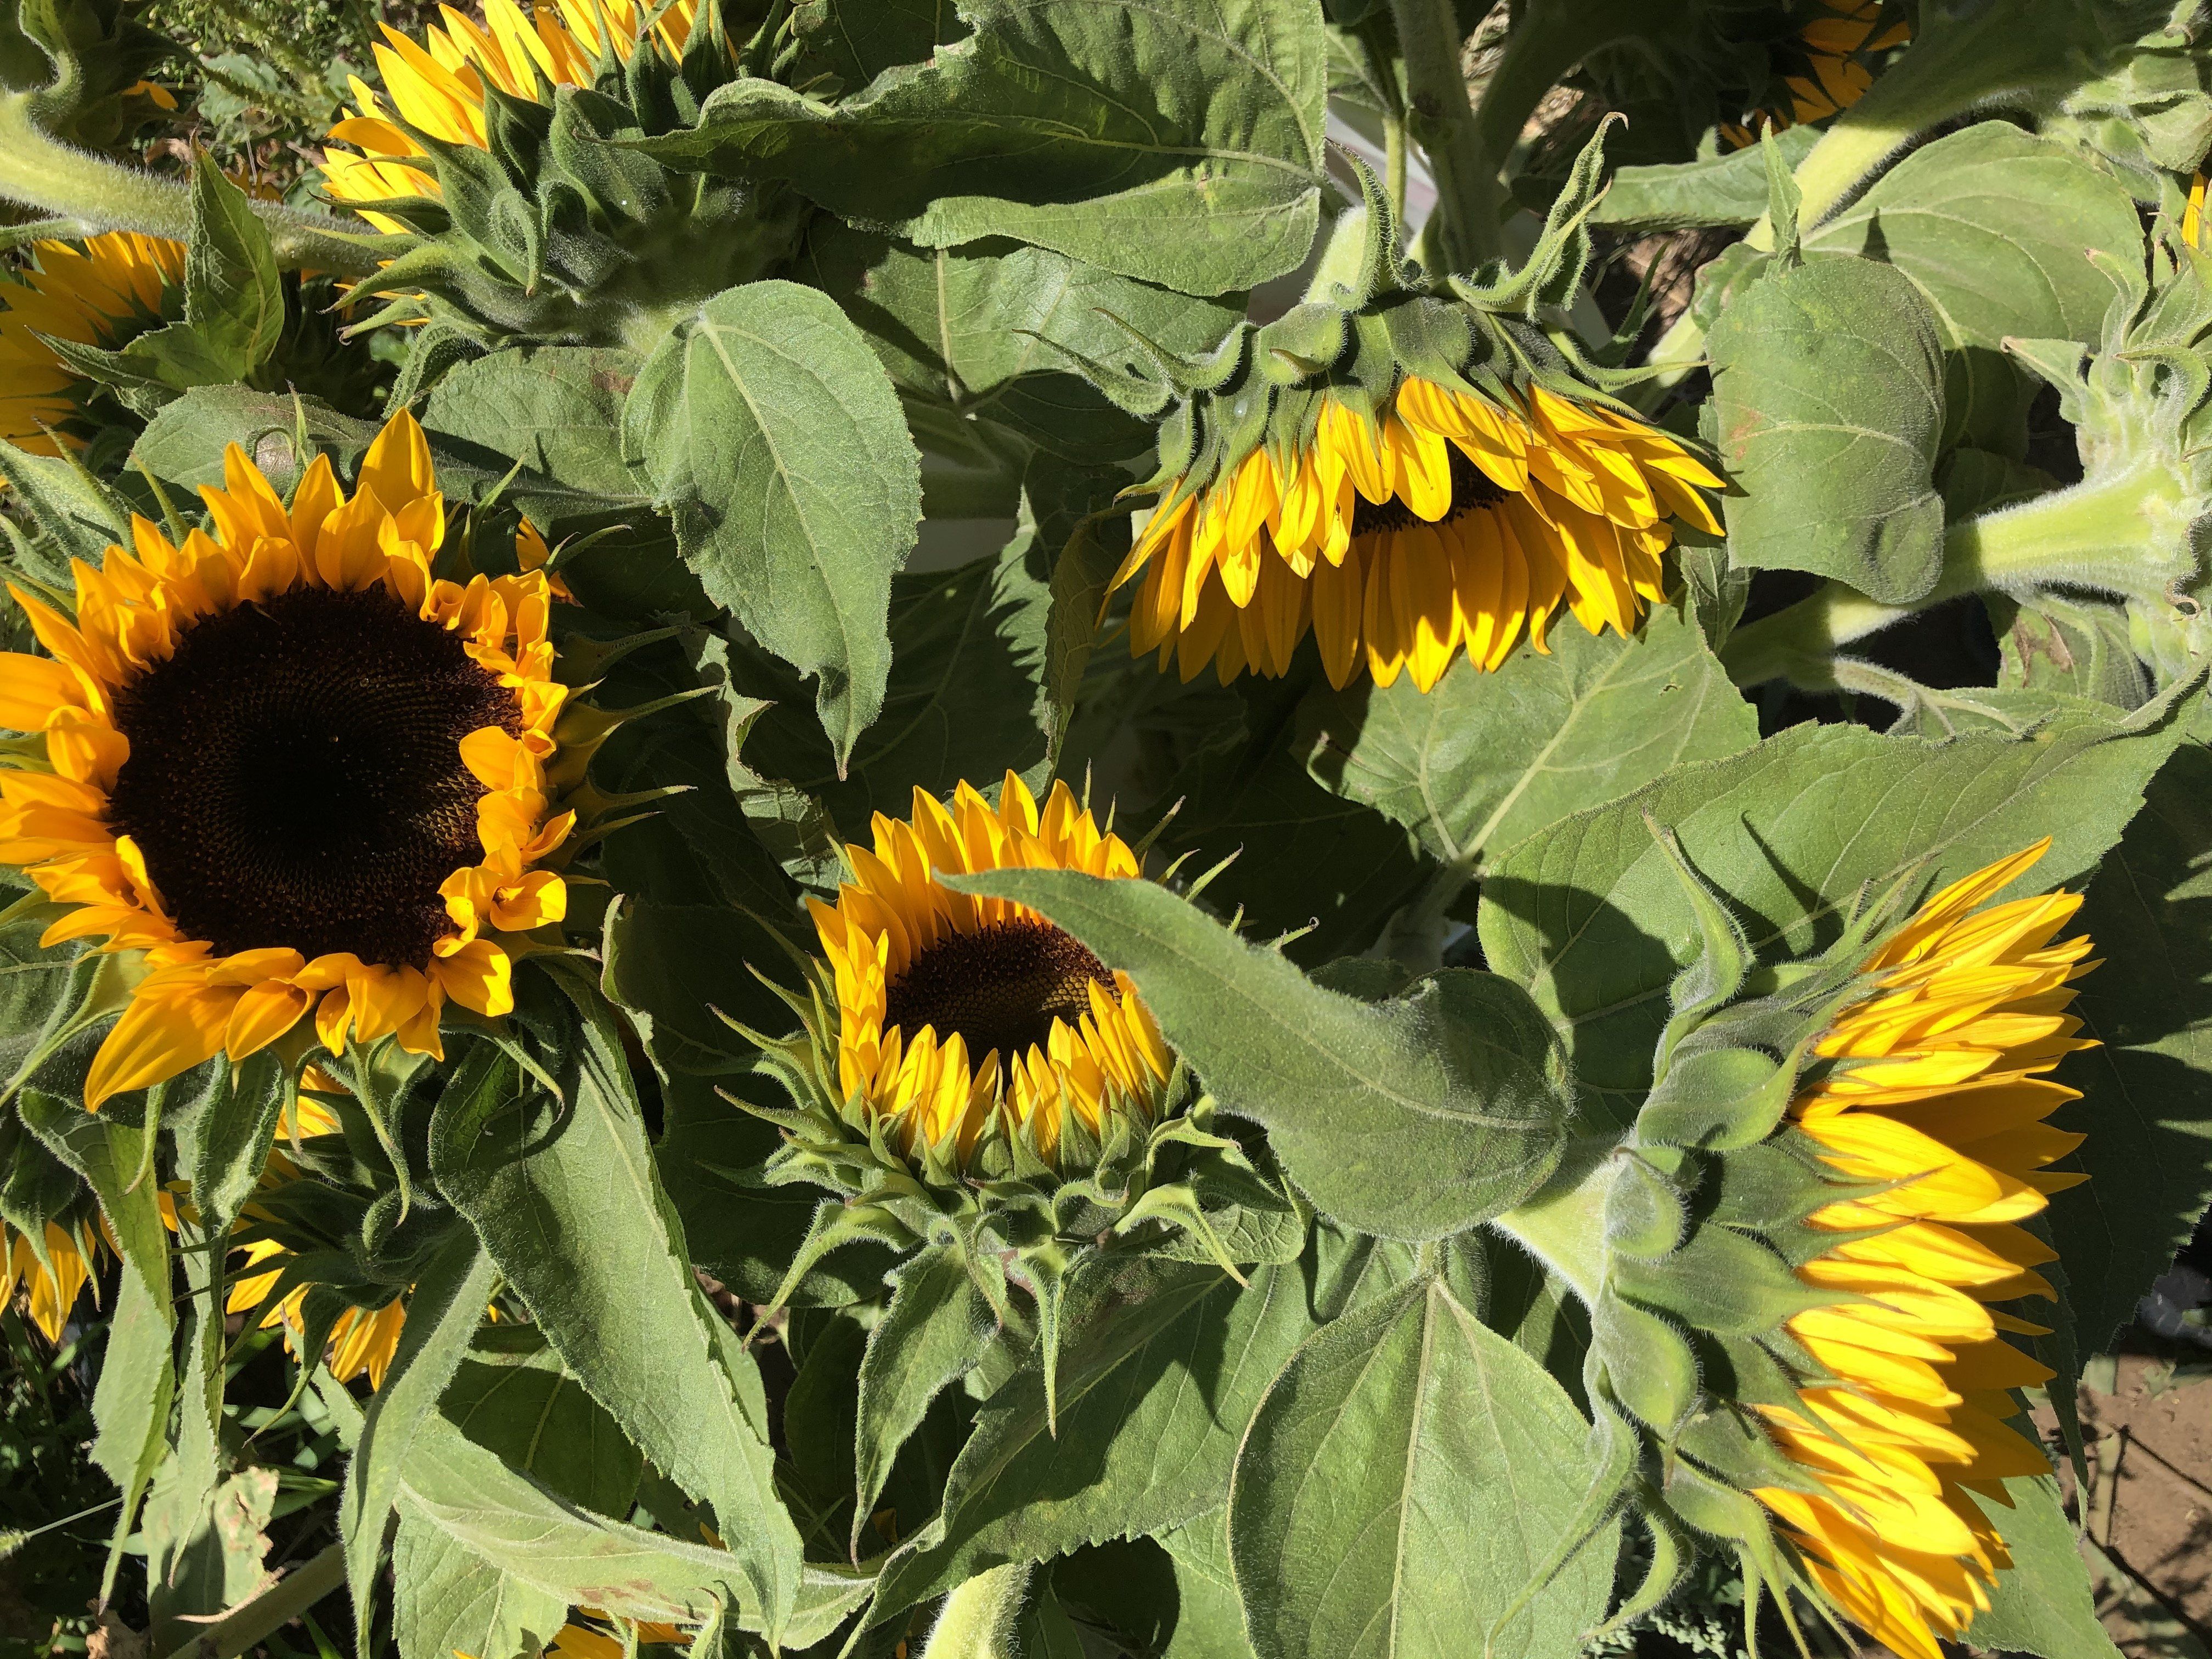 Previous Happening: Sunflowers.